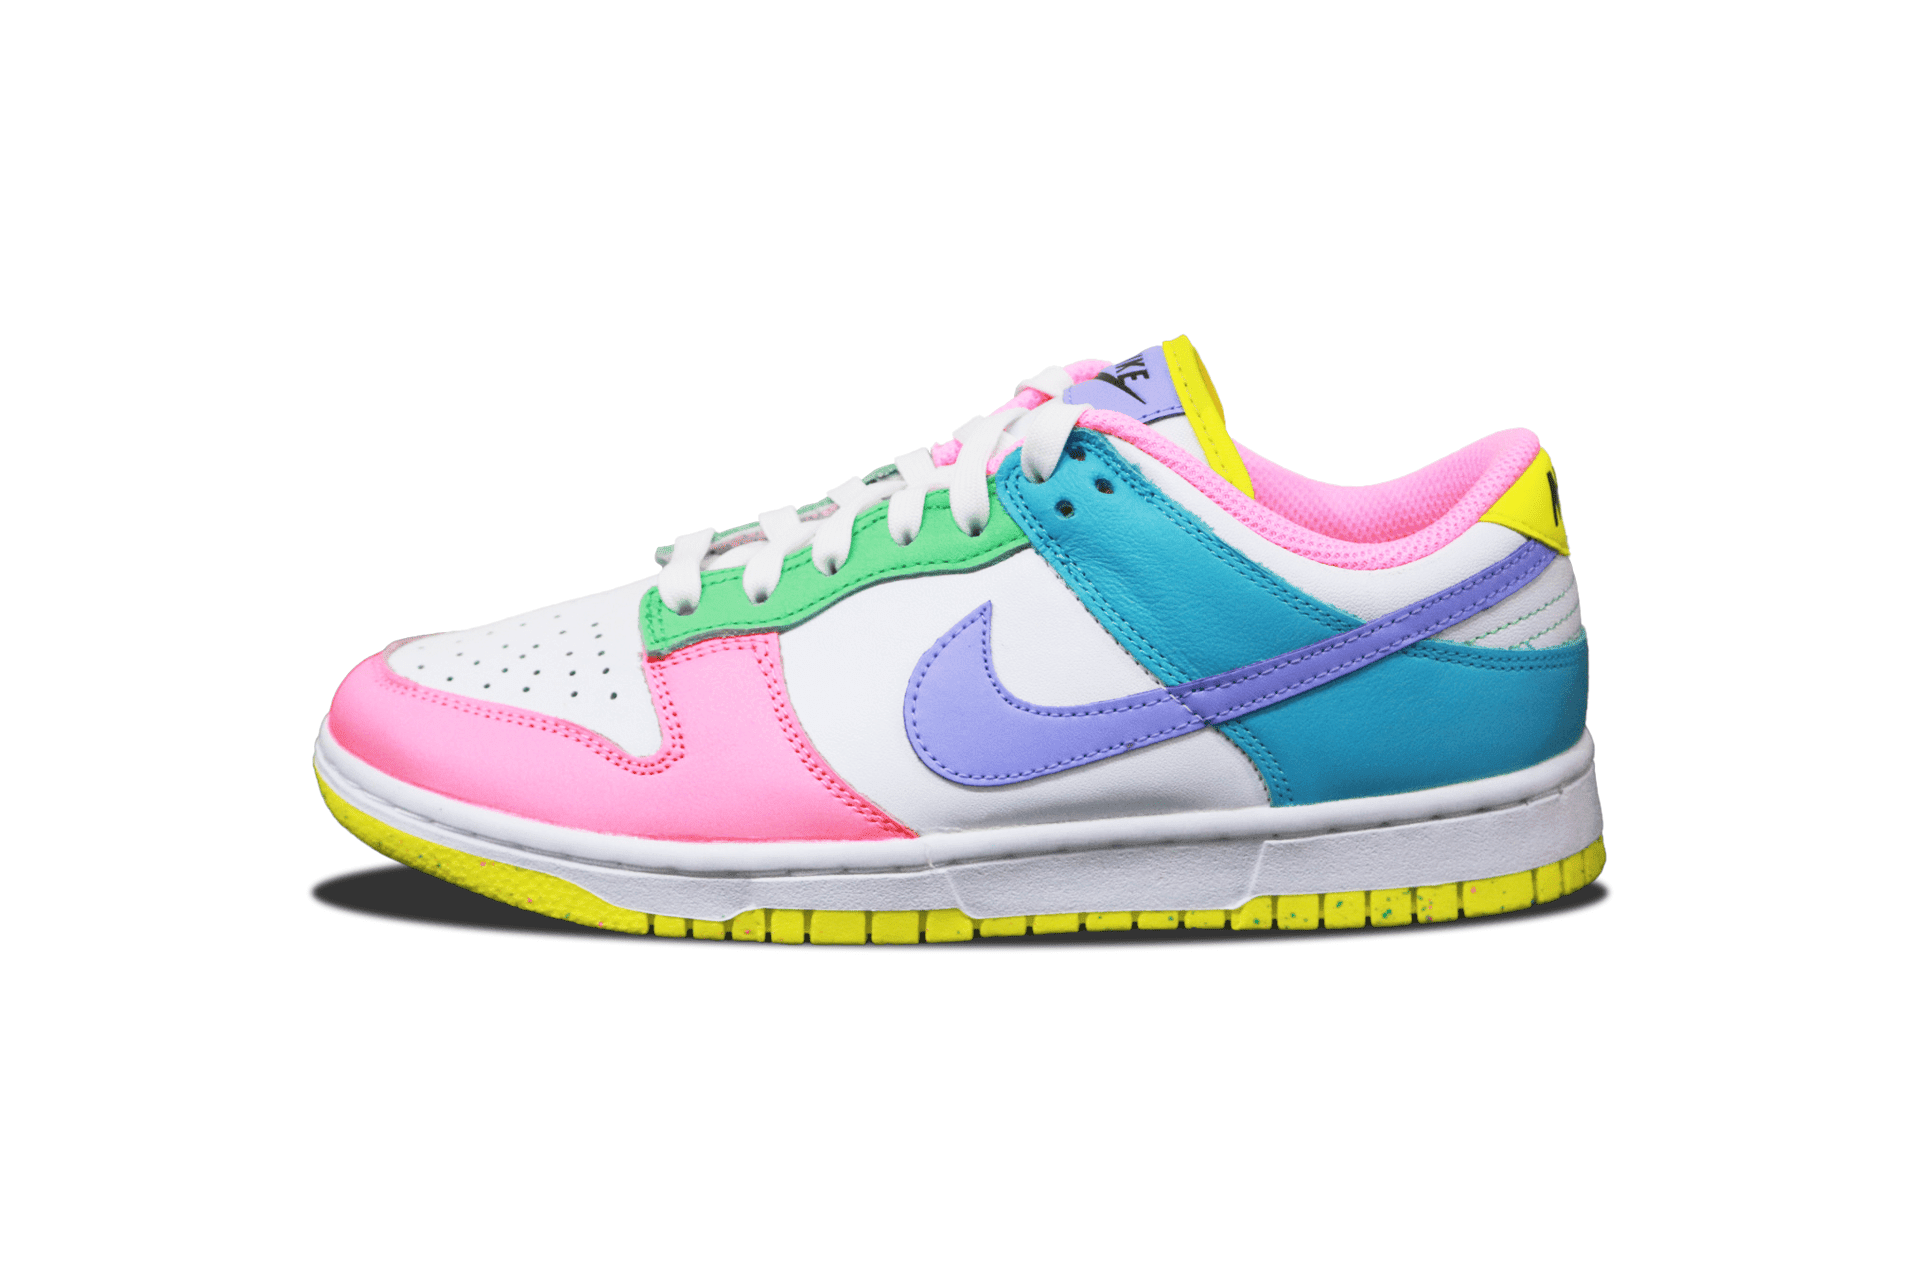 NIKE DUNK LOW EASTER CANDY - Kicksdaily